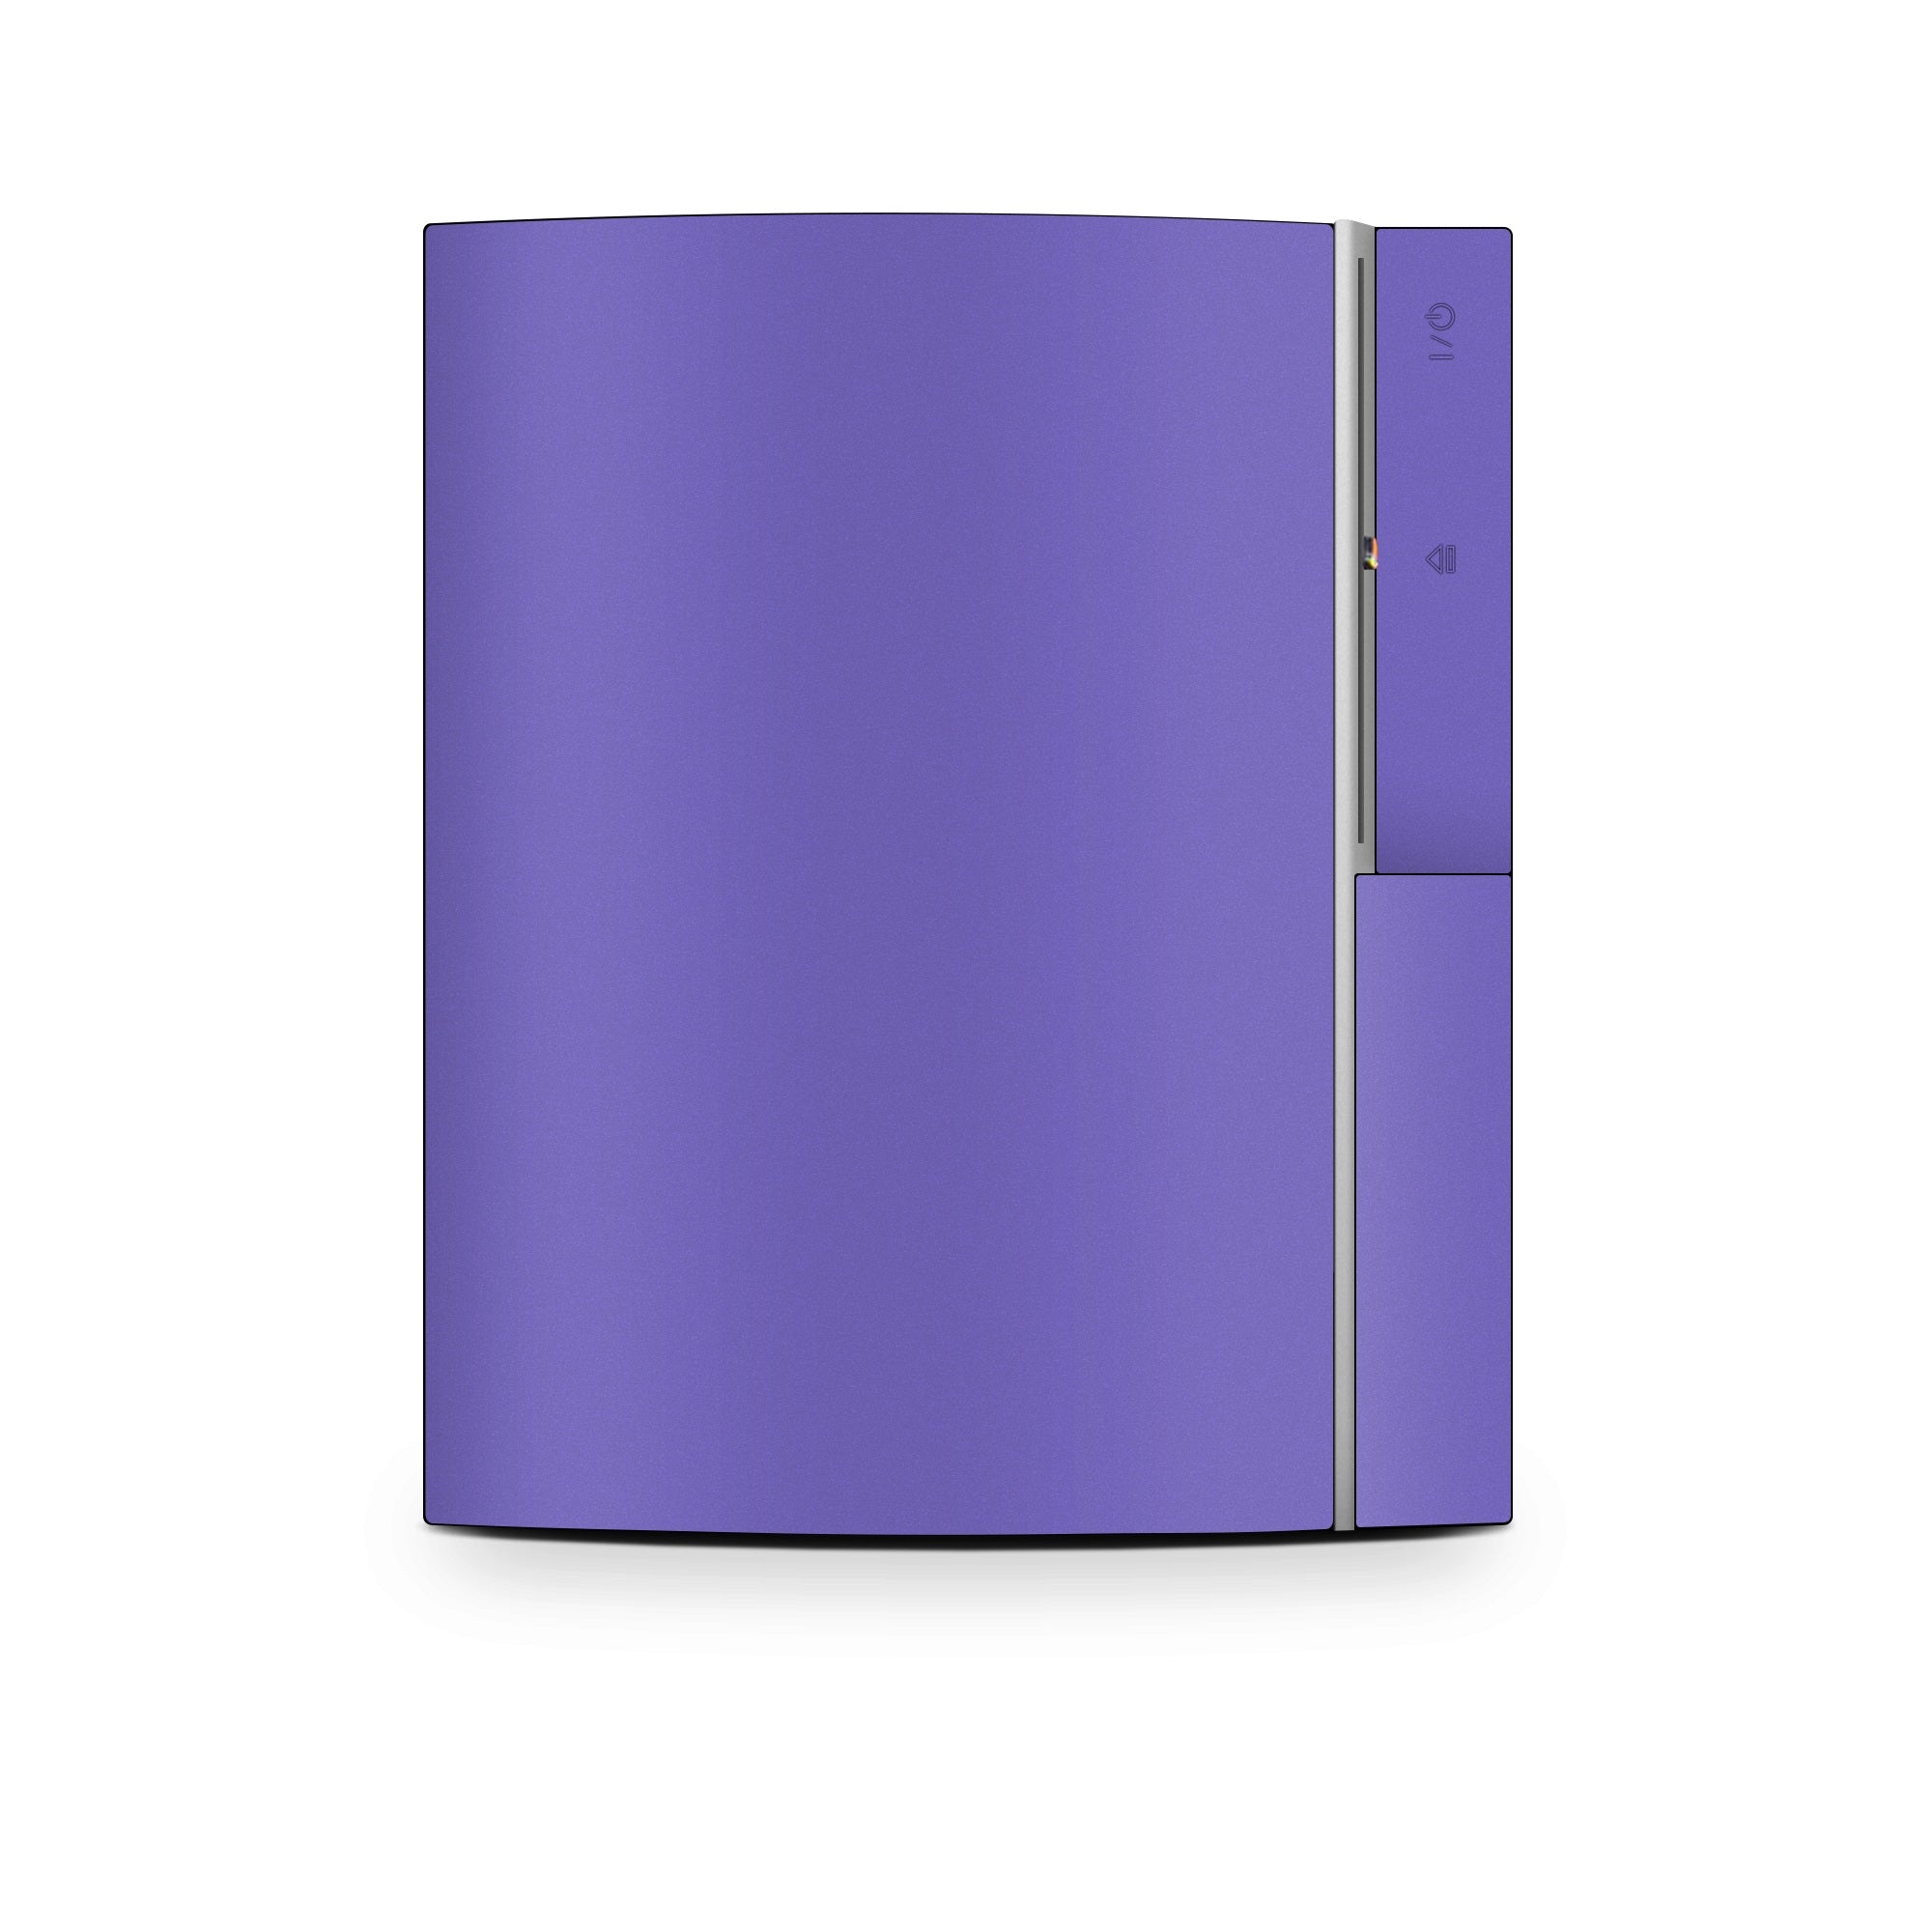 Solid State Purple - Sony PS3 Skin